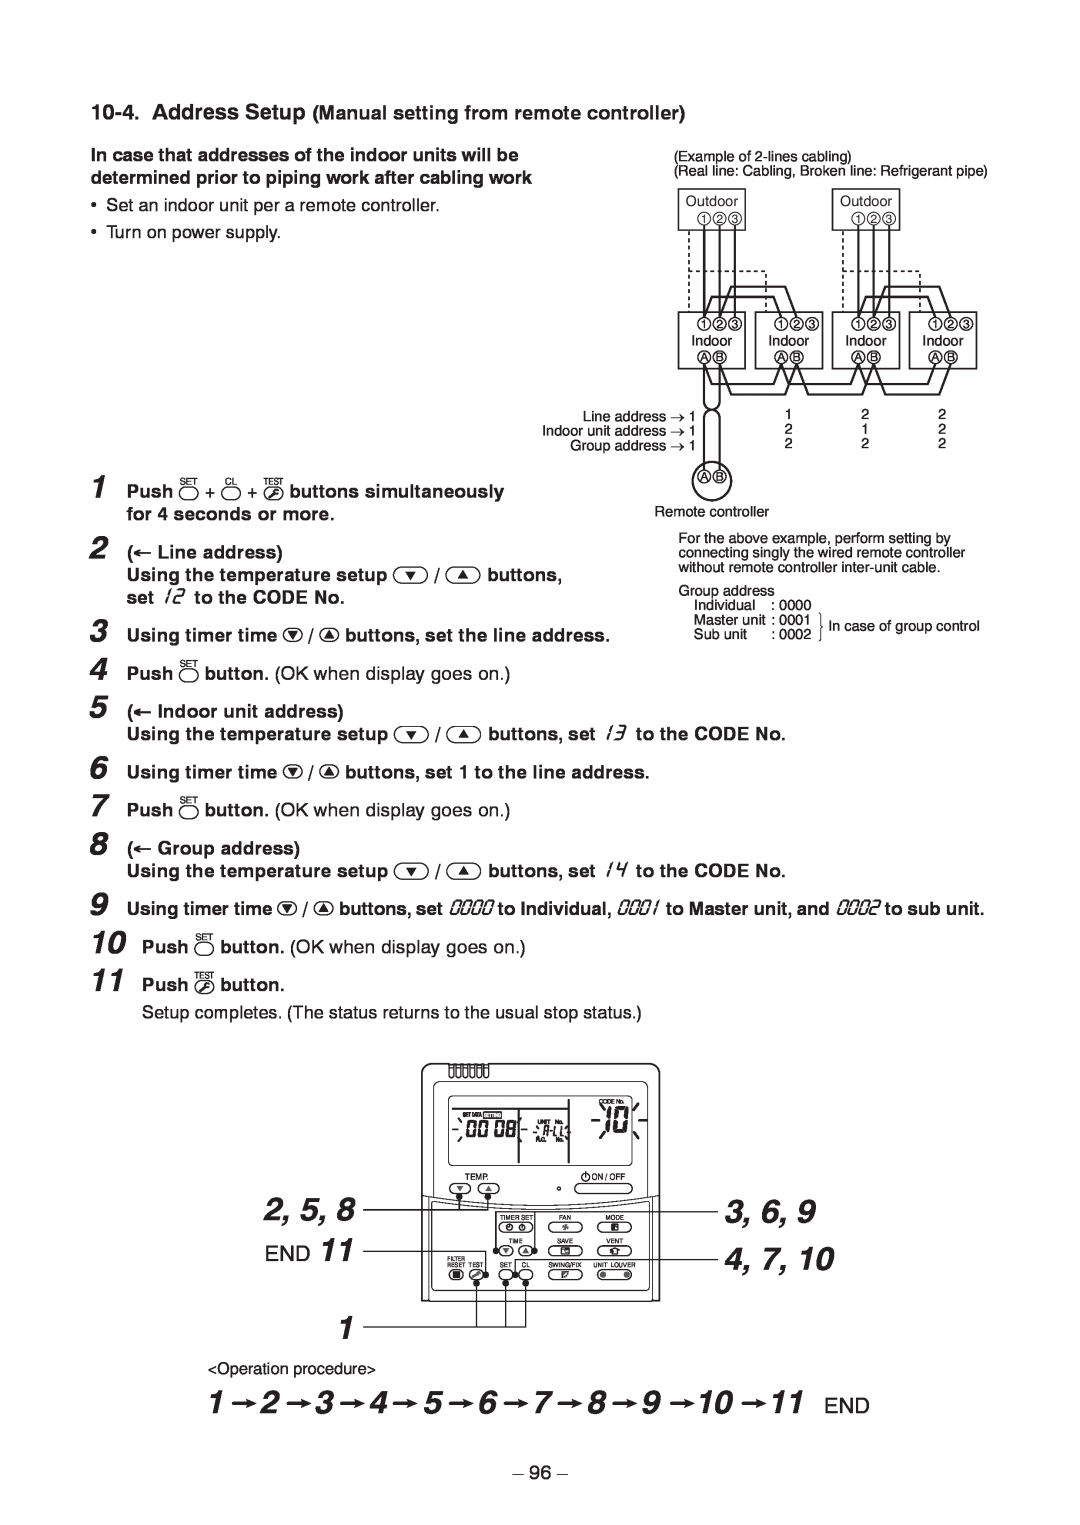 Toshiba RAV-SP1104AT8Z-E, RAV-SP1104AT8ZG-TR, RAV-SP1104AT8-TR service manual 2, 5, 3, 6, 9 4, 7, 1 2 3 4 5 6 7 8 9 10 11 END 